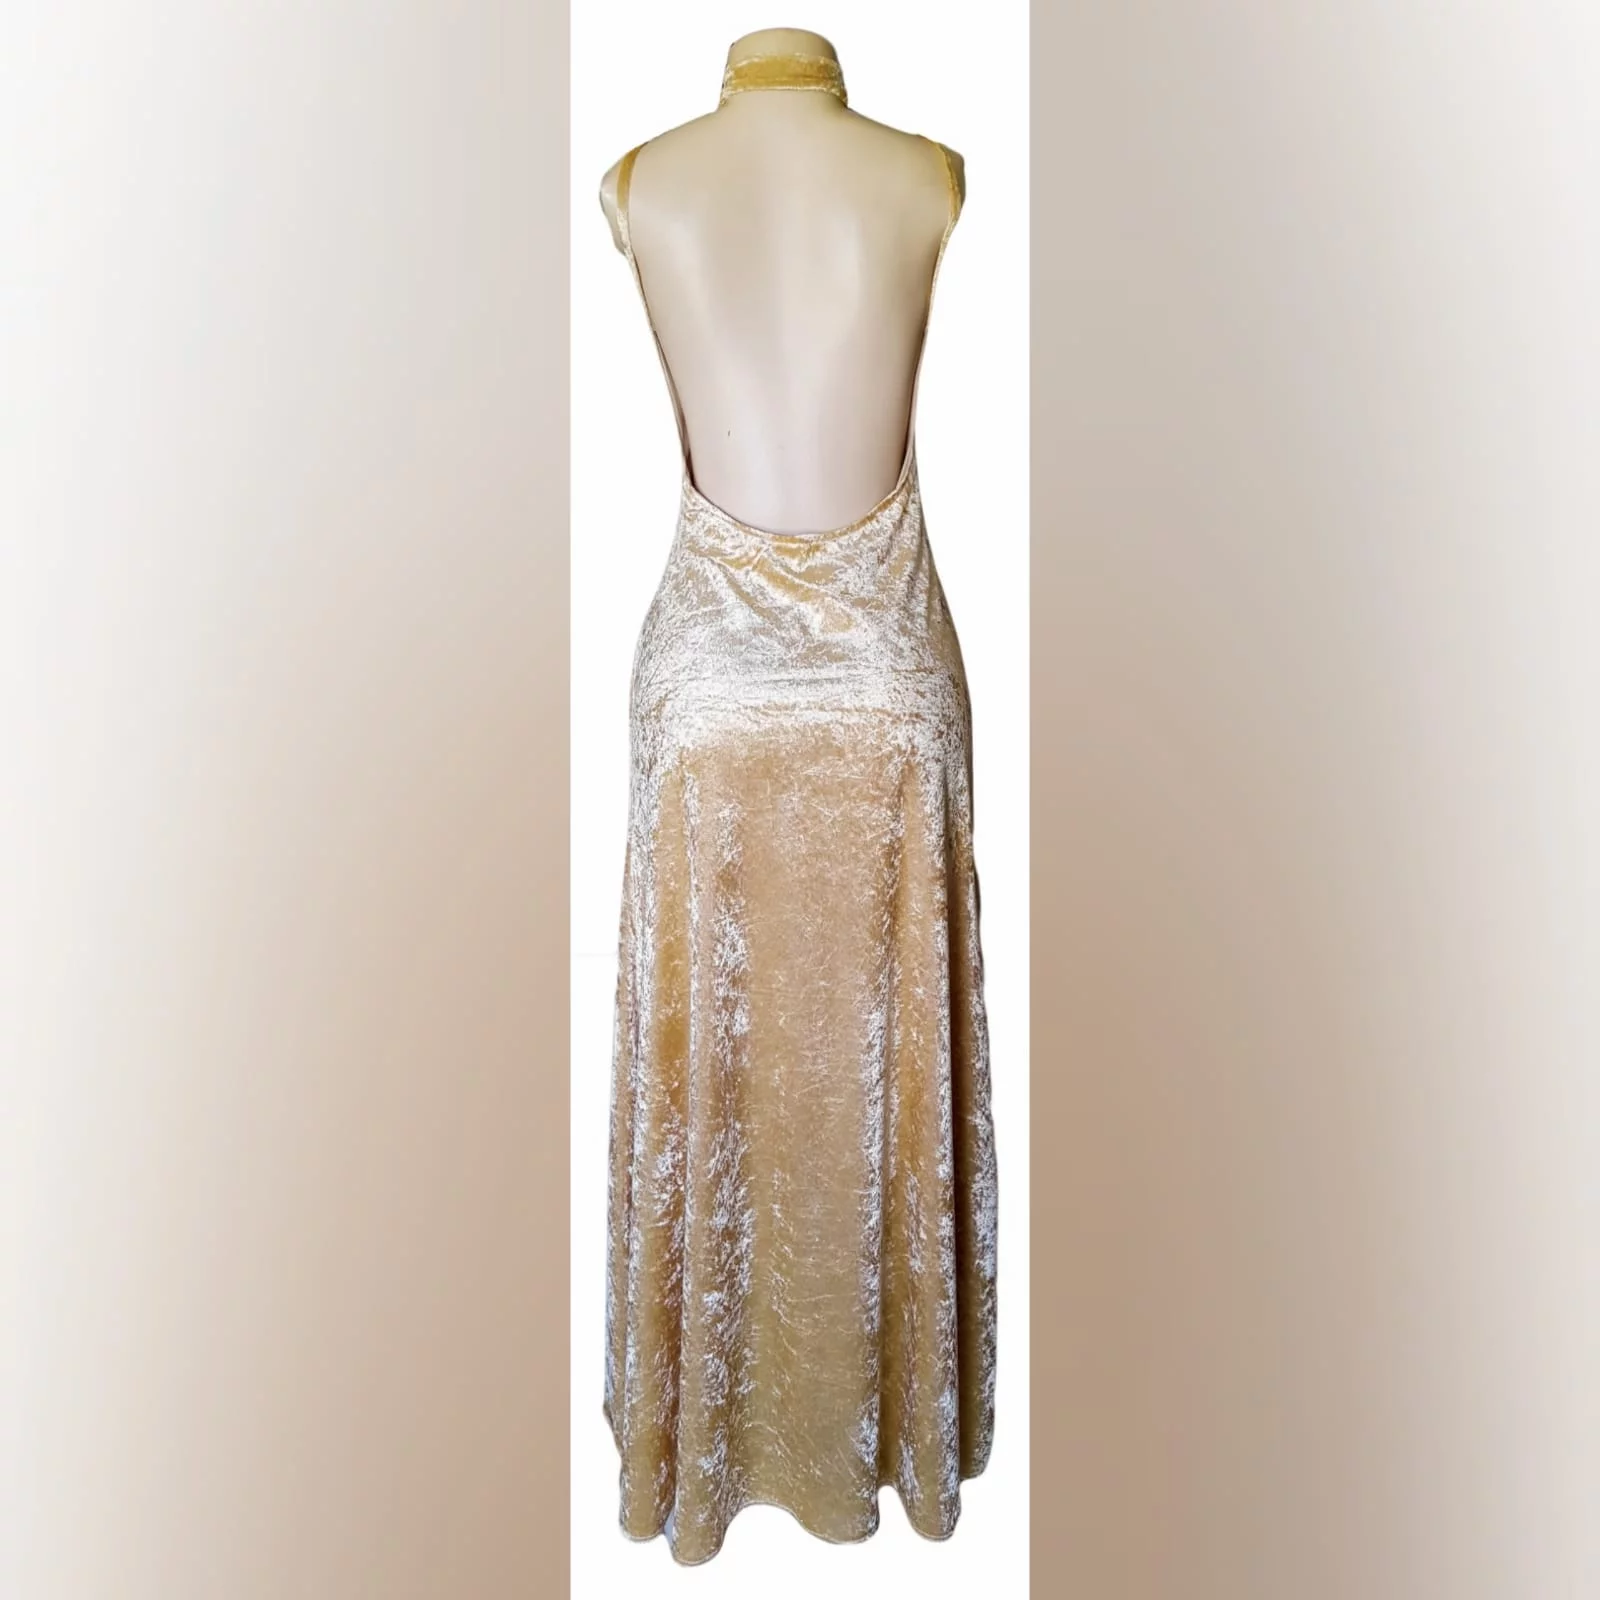 Champagne velvet long matric dance dress 4 champagne velvet long matric dance dress with a v neckline, rounded backless design with a high slit and a matching choker.